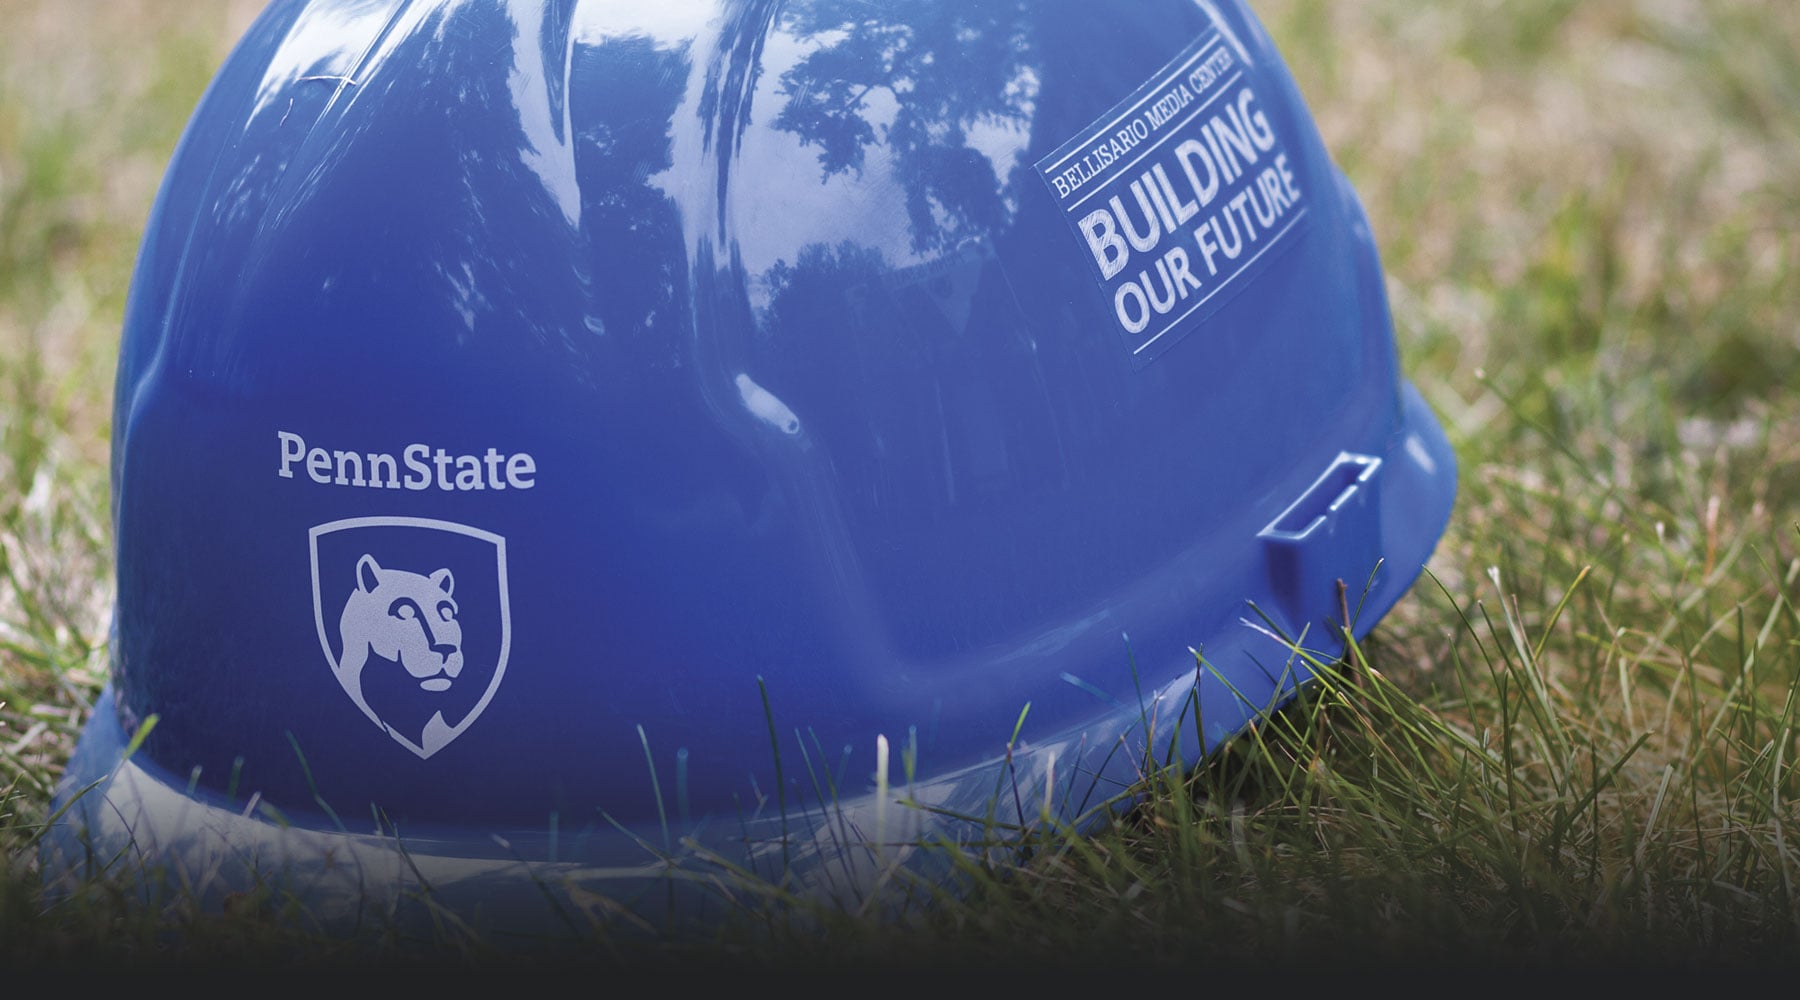 A blue hardhat with the Penn State logo features text on the side that reads Bellisario Media Center - Building Our Future